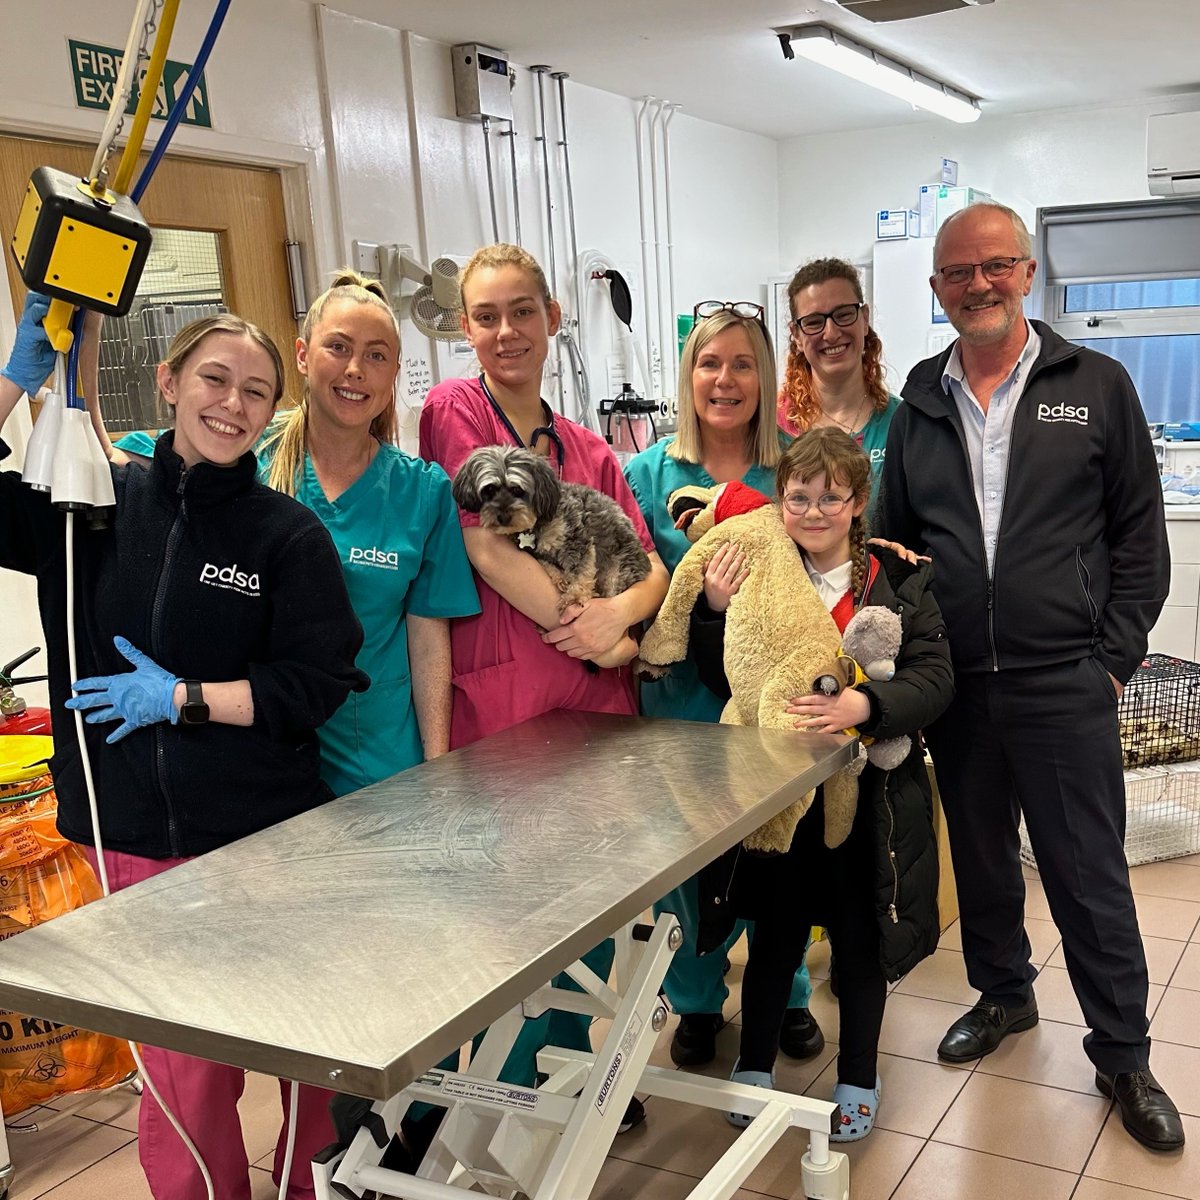 Rosie (9) and Poppy (9), have raised £67.50 for poorly #Pets, by making and selling loom bands at their school! The team at our #Leeds Pet Hospital looked after Rosie’s late dog, Roxie, who sadly passed away last year. This was Rosie’s way of thanking the team 🥰